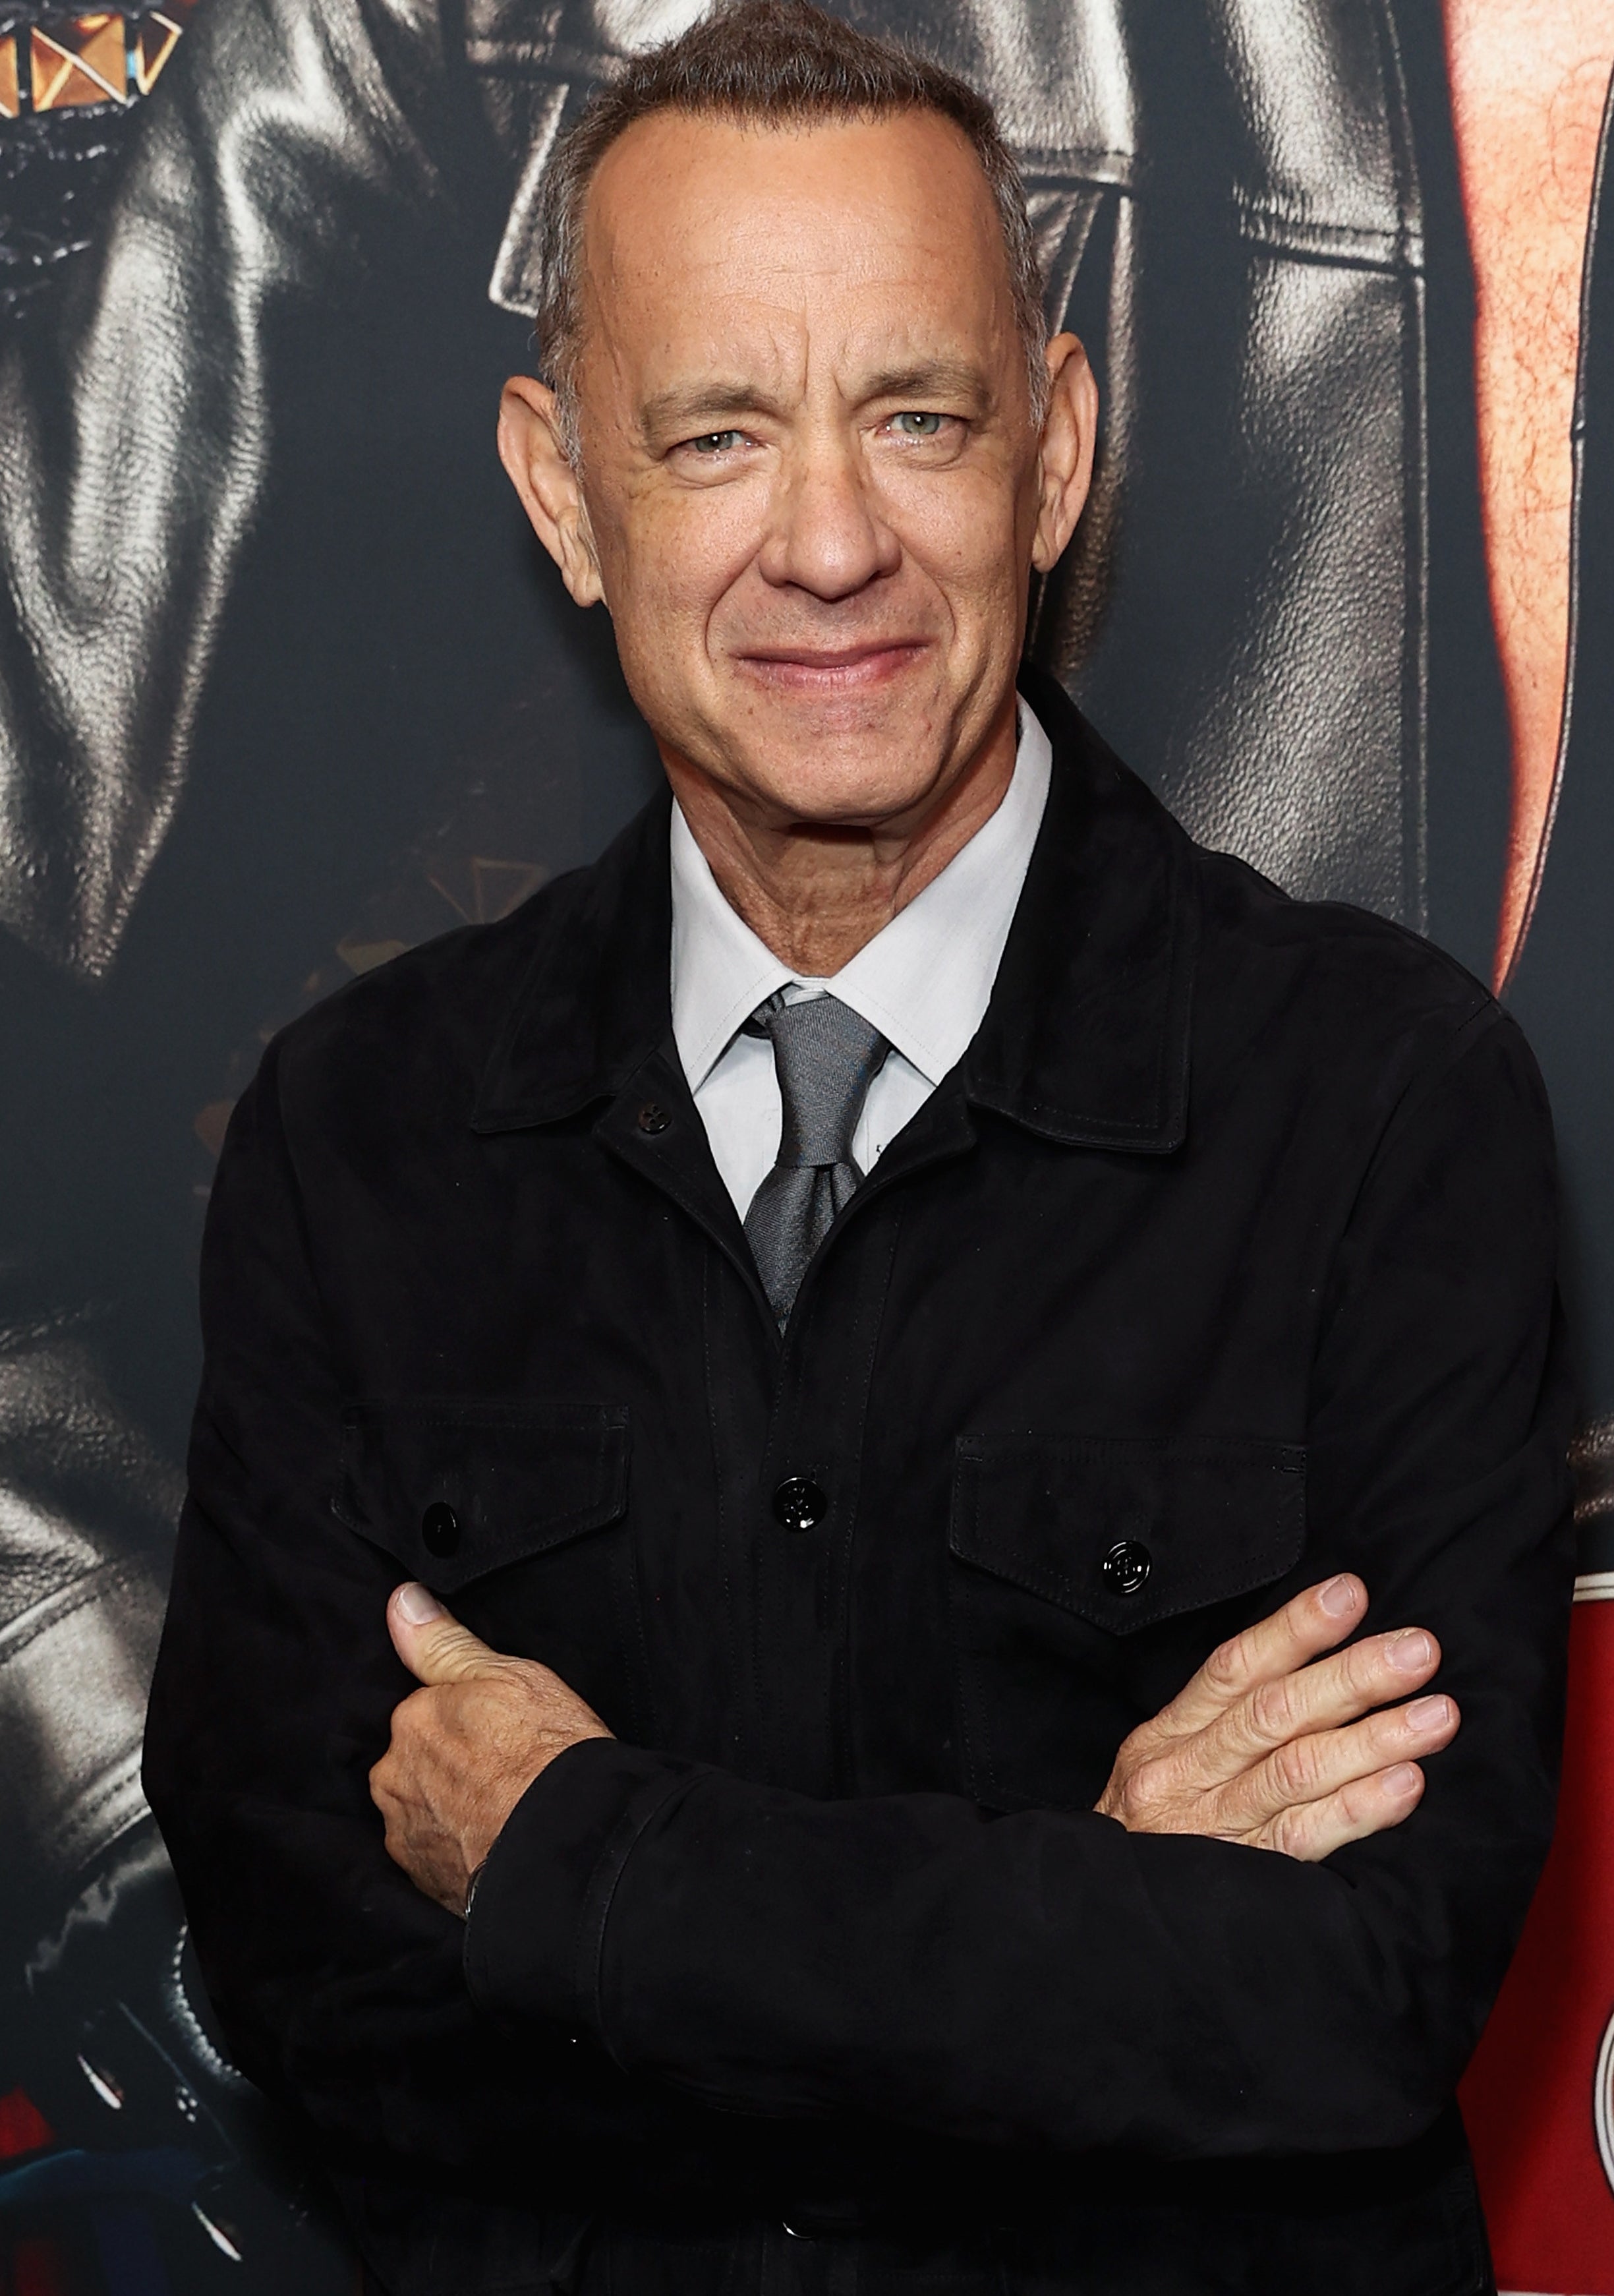 Tom Hanks attends the Sydney premiere of ELVIS at the State Theatre on June 05, 2022